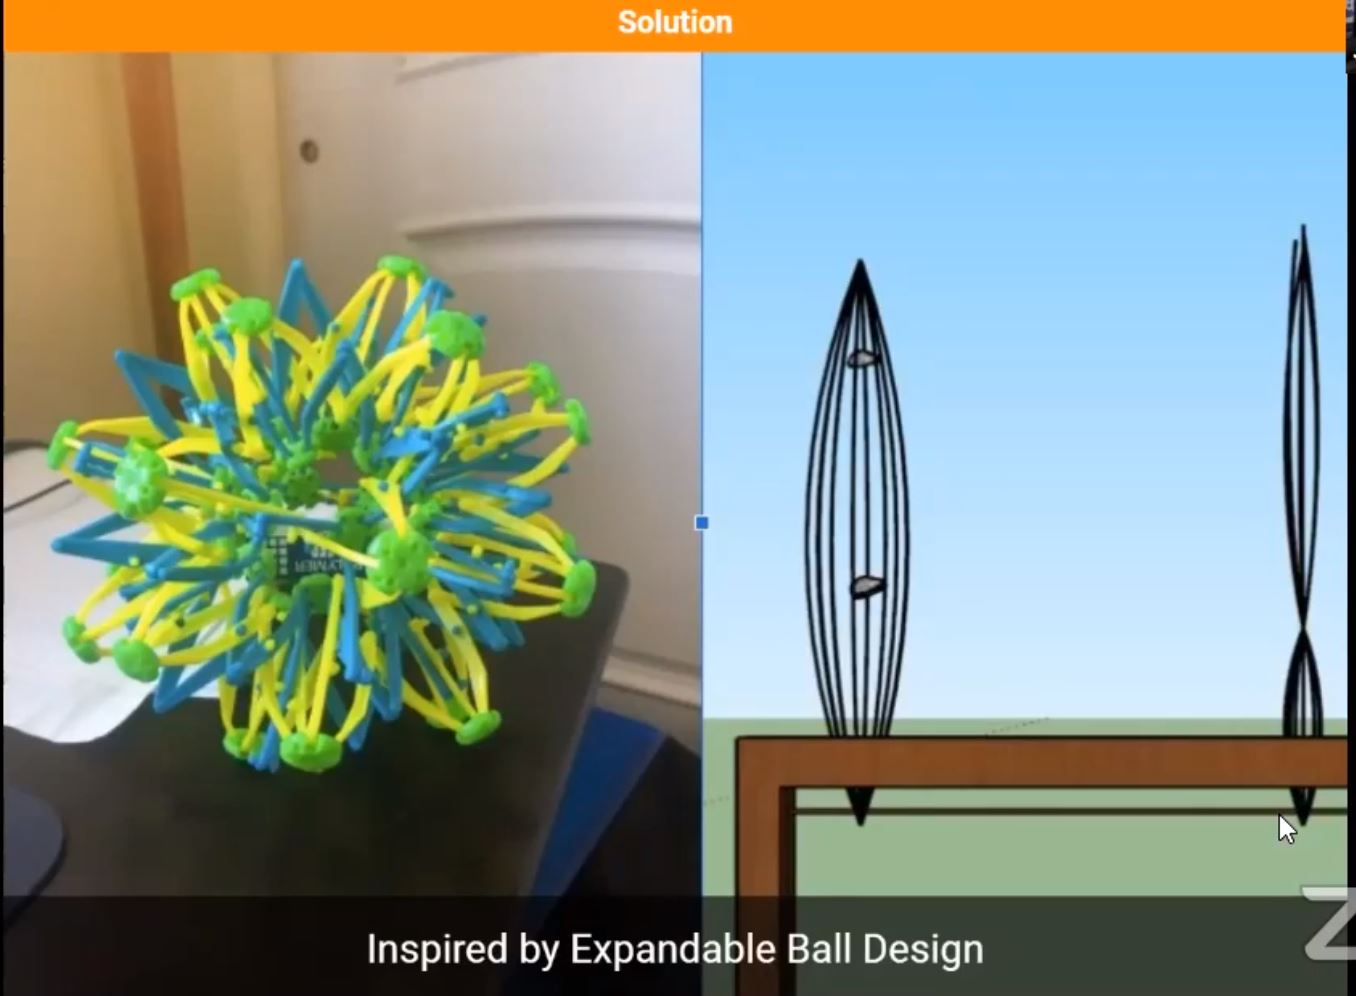 Mangrove-inspired cage design diagram next to photo of expandable ball